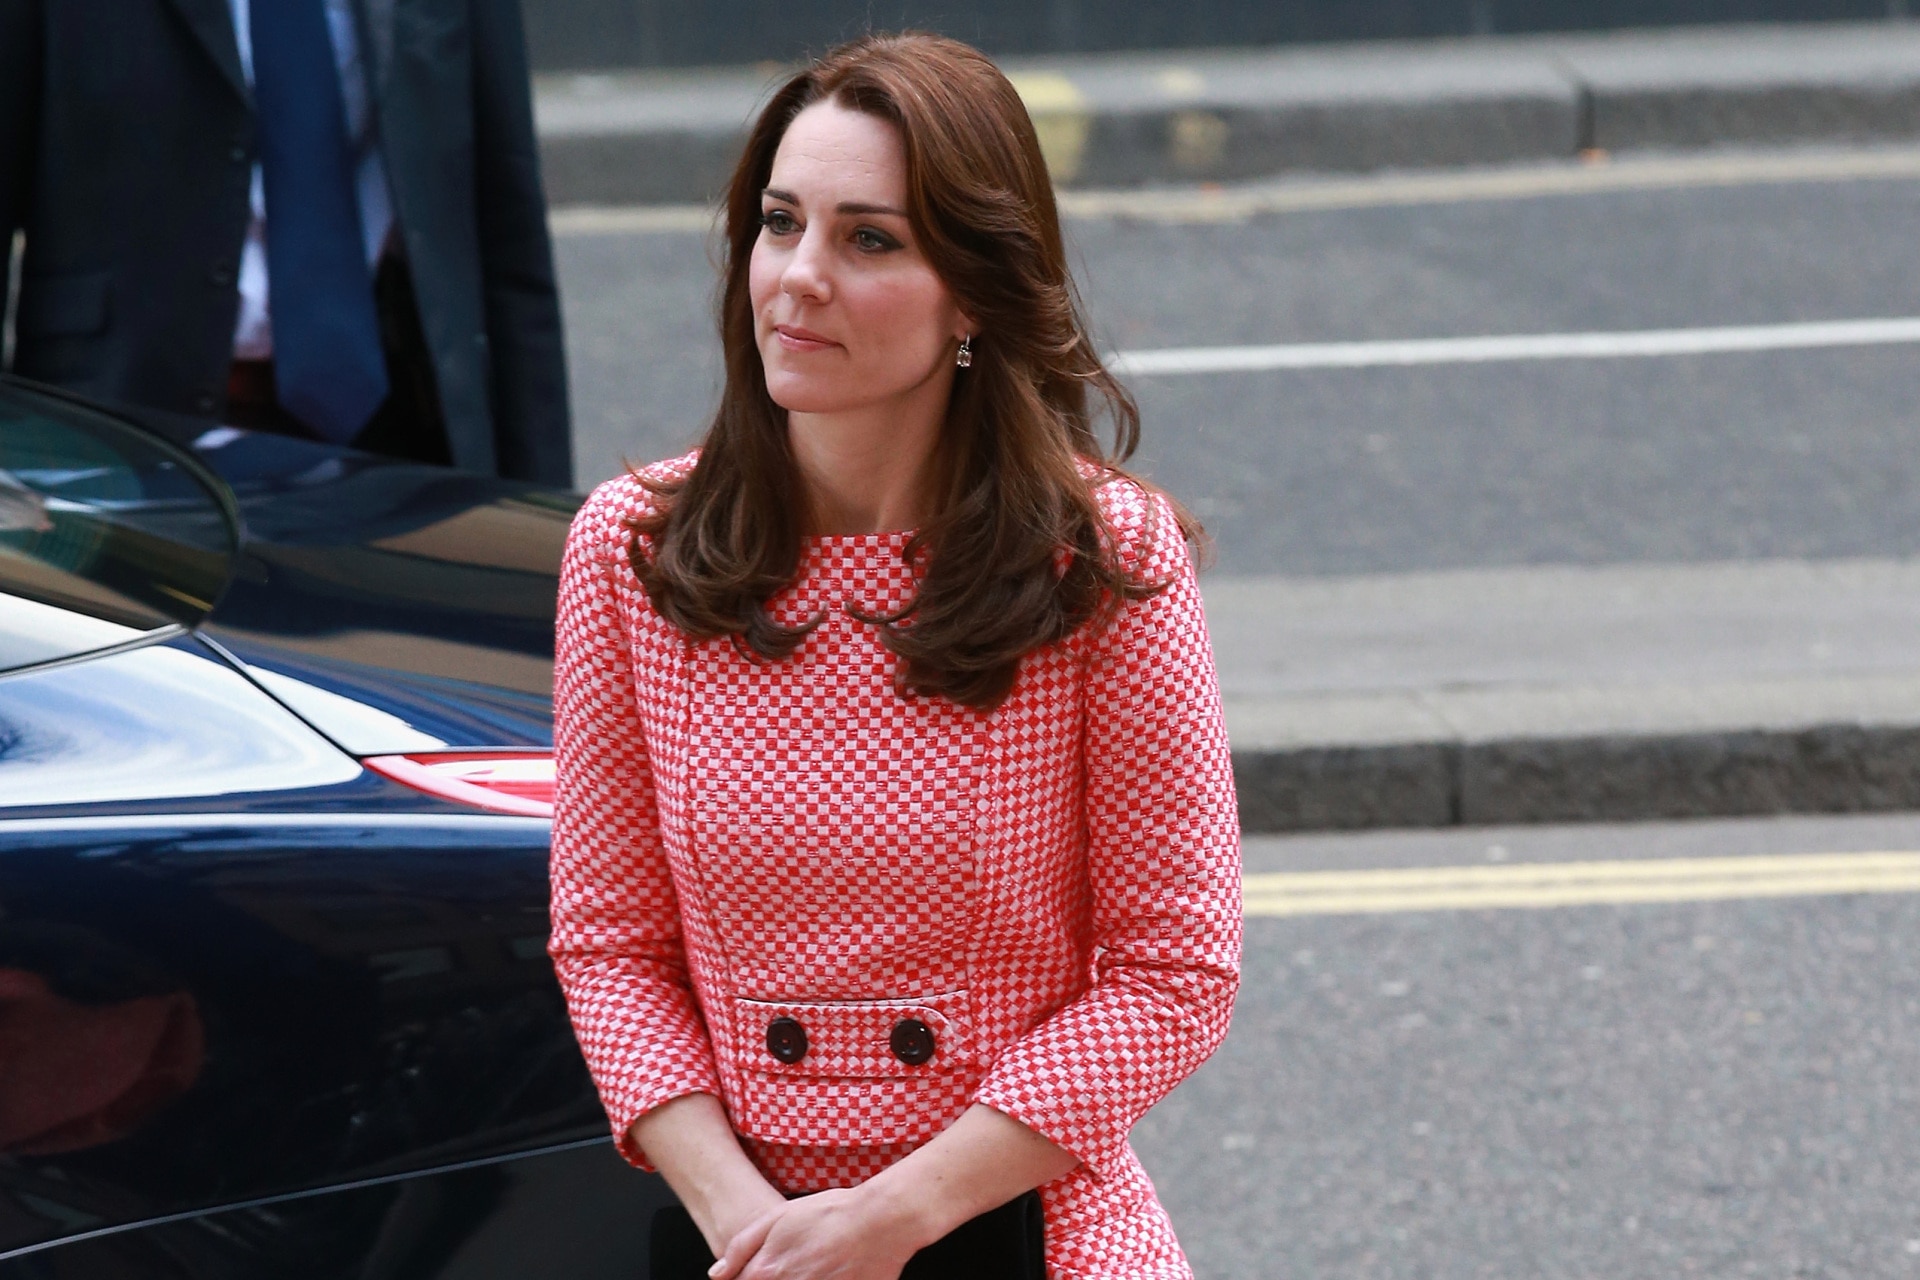 Kate Middleton Wore Her Gucci Blouse Backwards for a Visit to